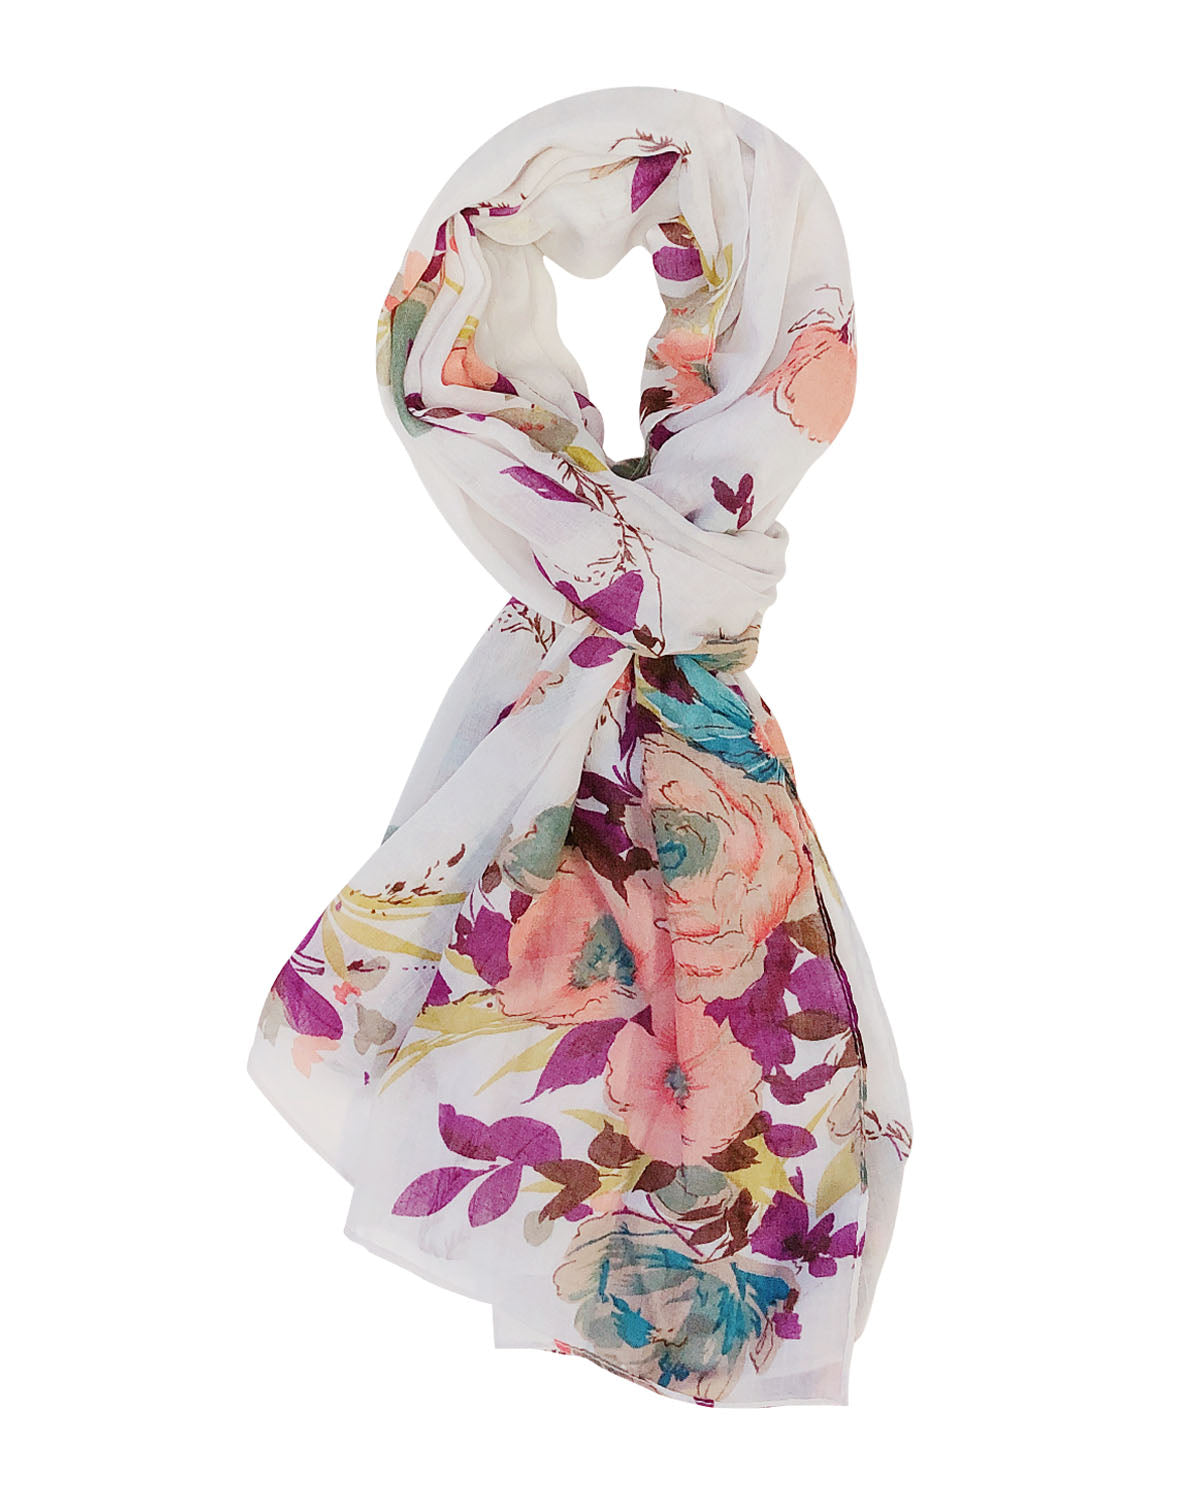 XYCCA Women's Scarves Lightweight and stylish scarf print floral print scarf  shawl wrap, super smooth to the touch, light and comfortable. 